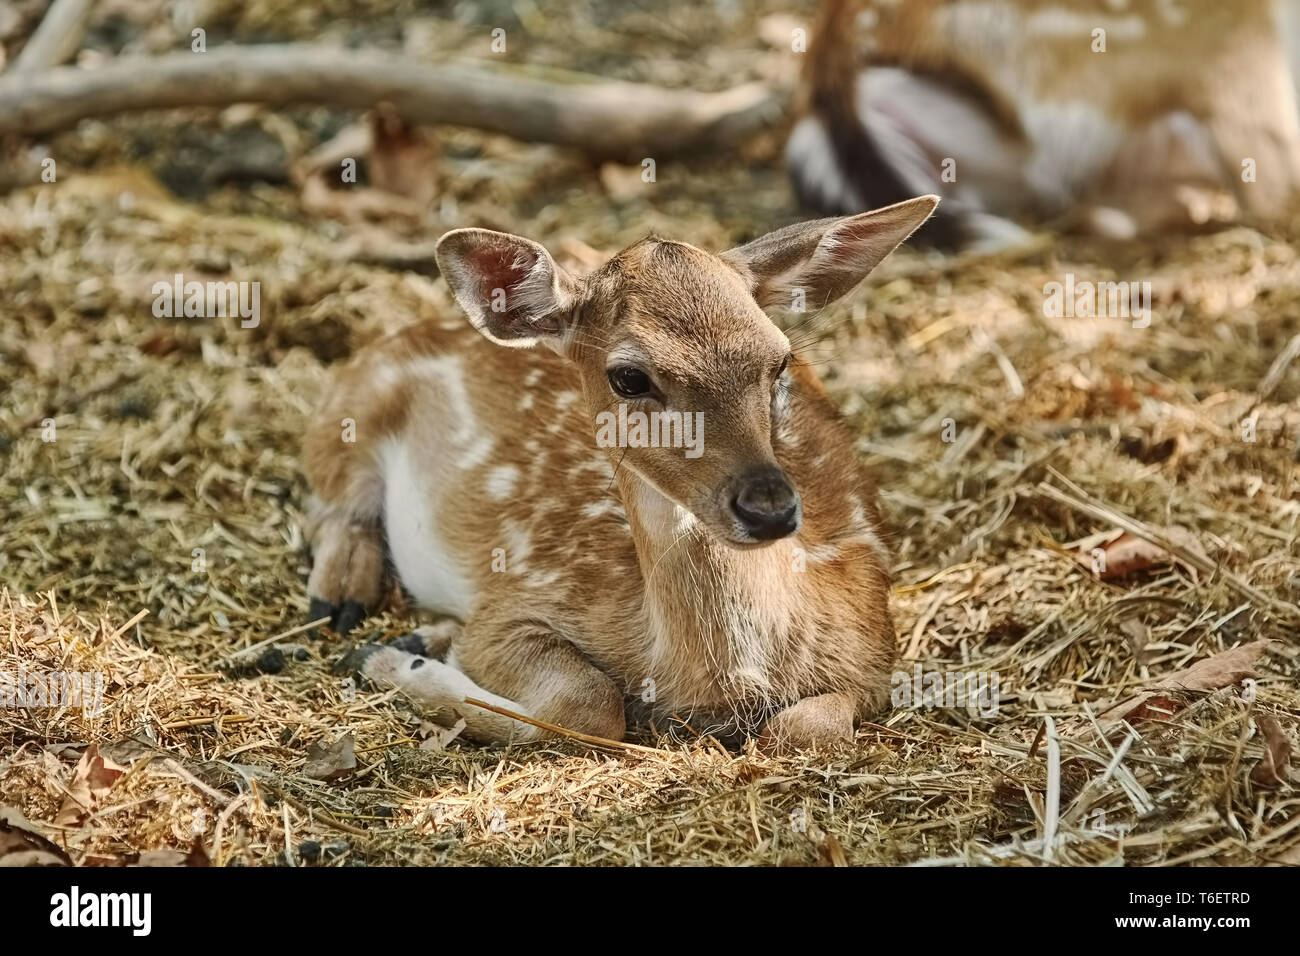 Portrait of a Young Deer Stock Photo